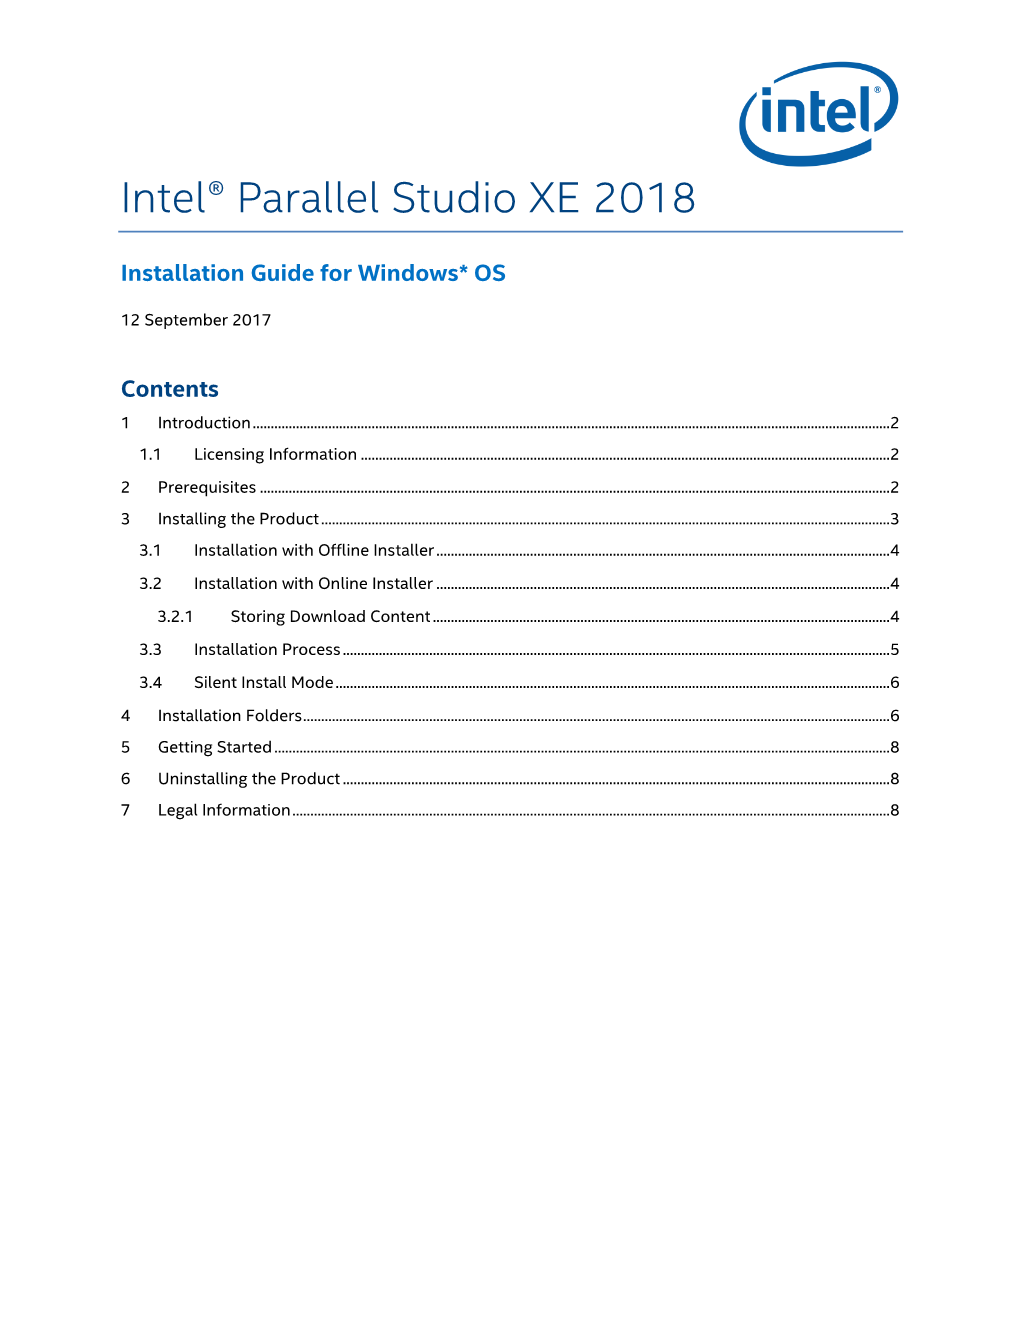 Intel® Parallel Studio XE Installation Guide for Windows* OS